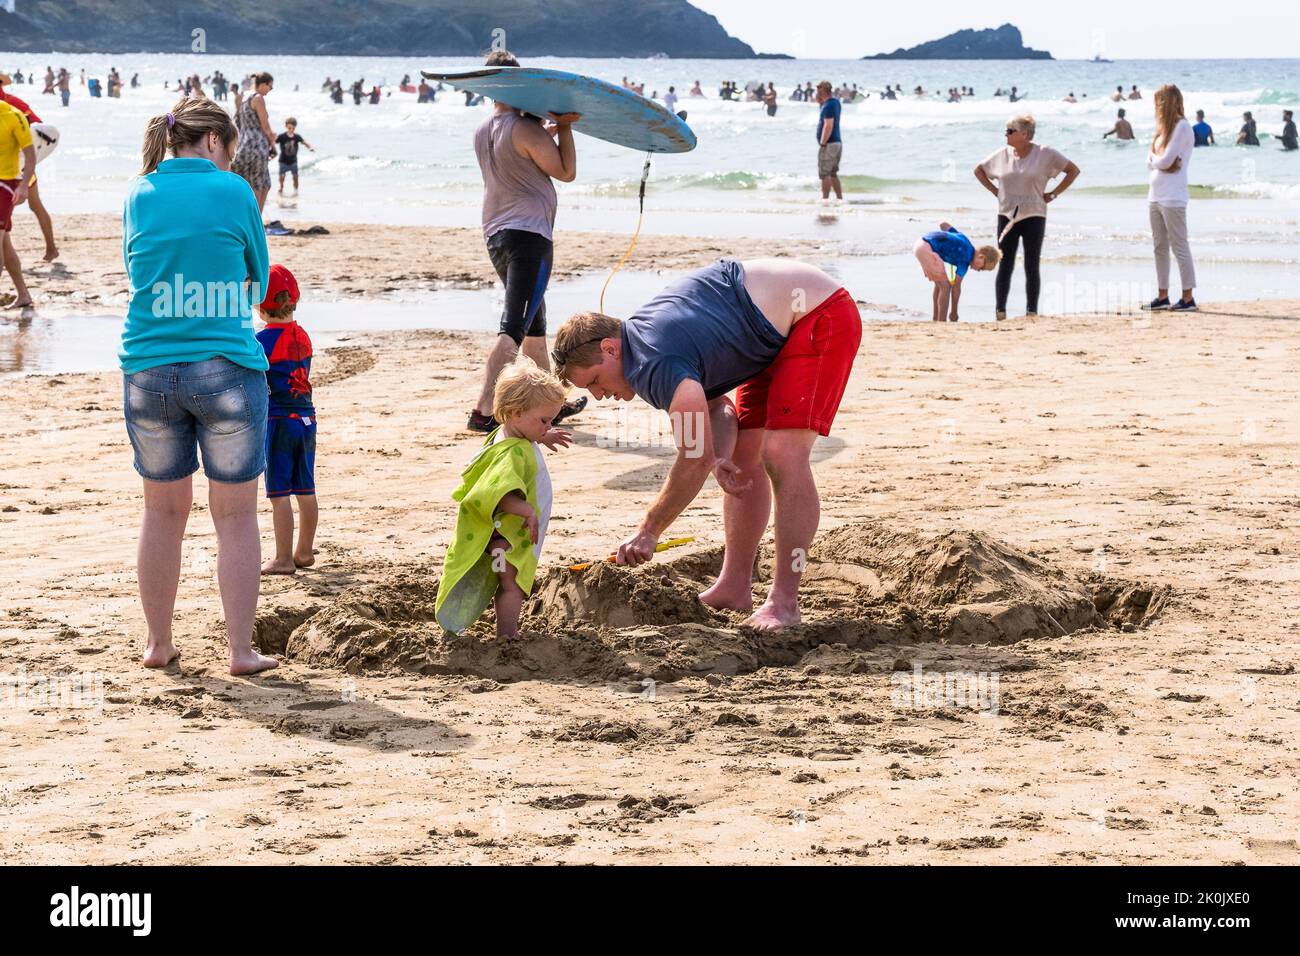 Holidaymakers enjoying themselves on Fistral Beach Newquay in Cornwall in the UK. Stock Photo